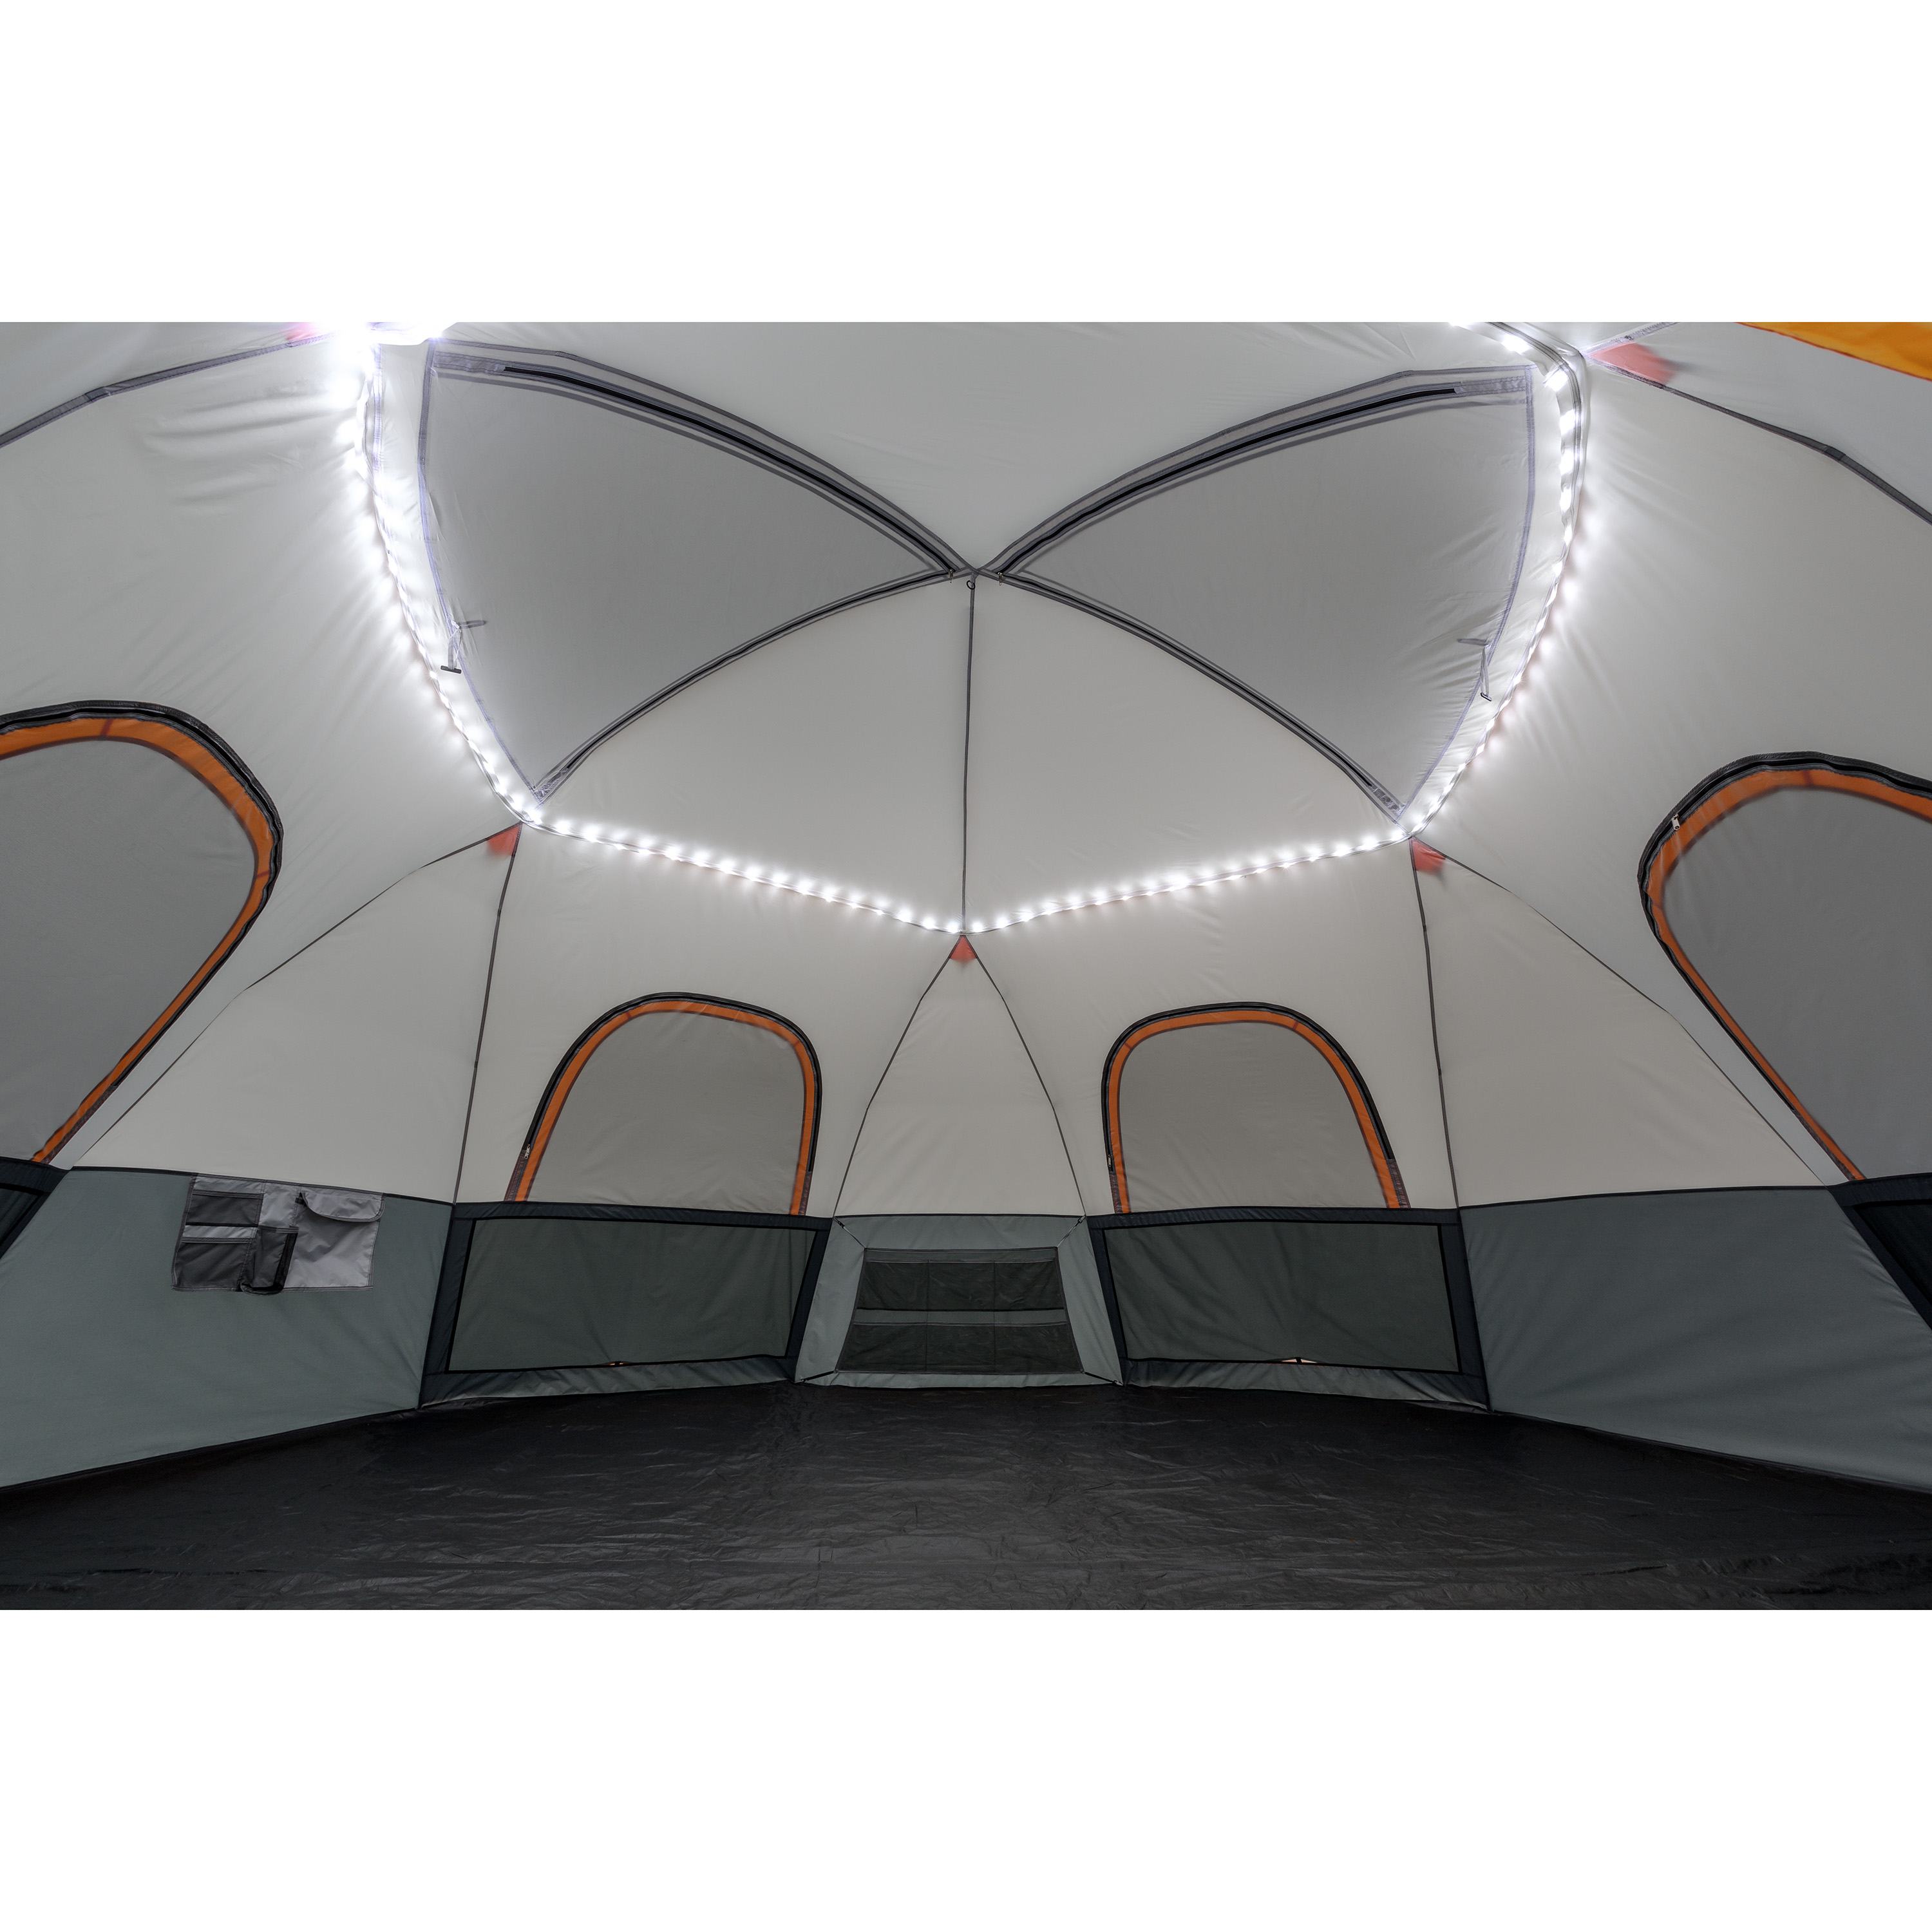 Ozark Trail 15’ x 15’ 9-Person Lighted Sphere Tent, 30.97 lbs - image 5 of 8